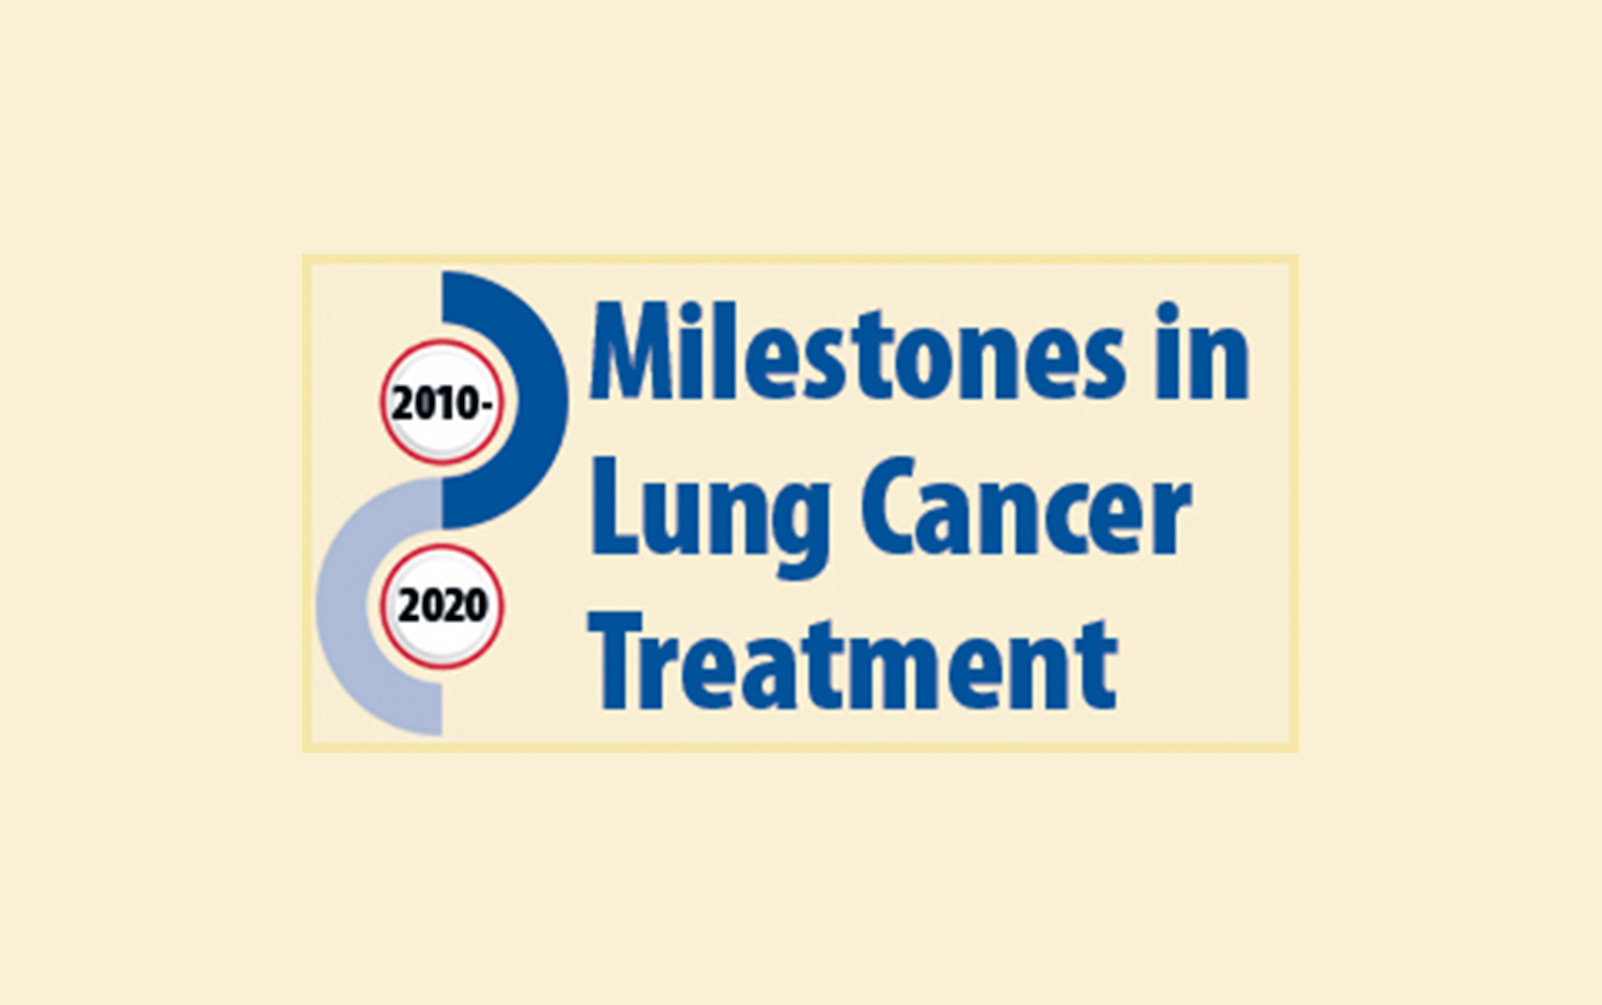 Milestones in Lung Cancer Treatment